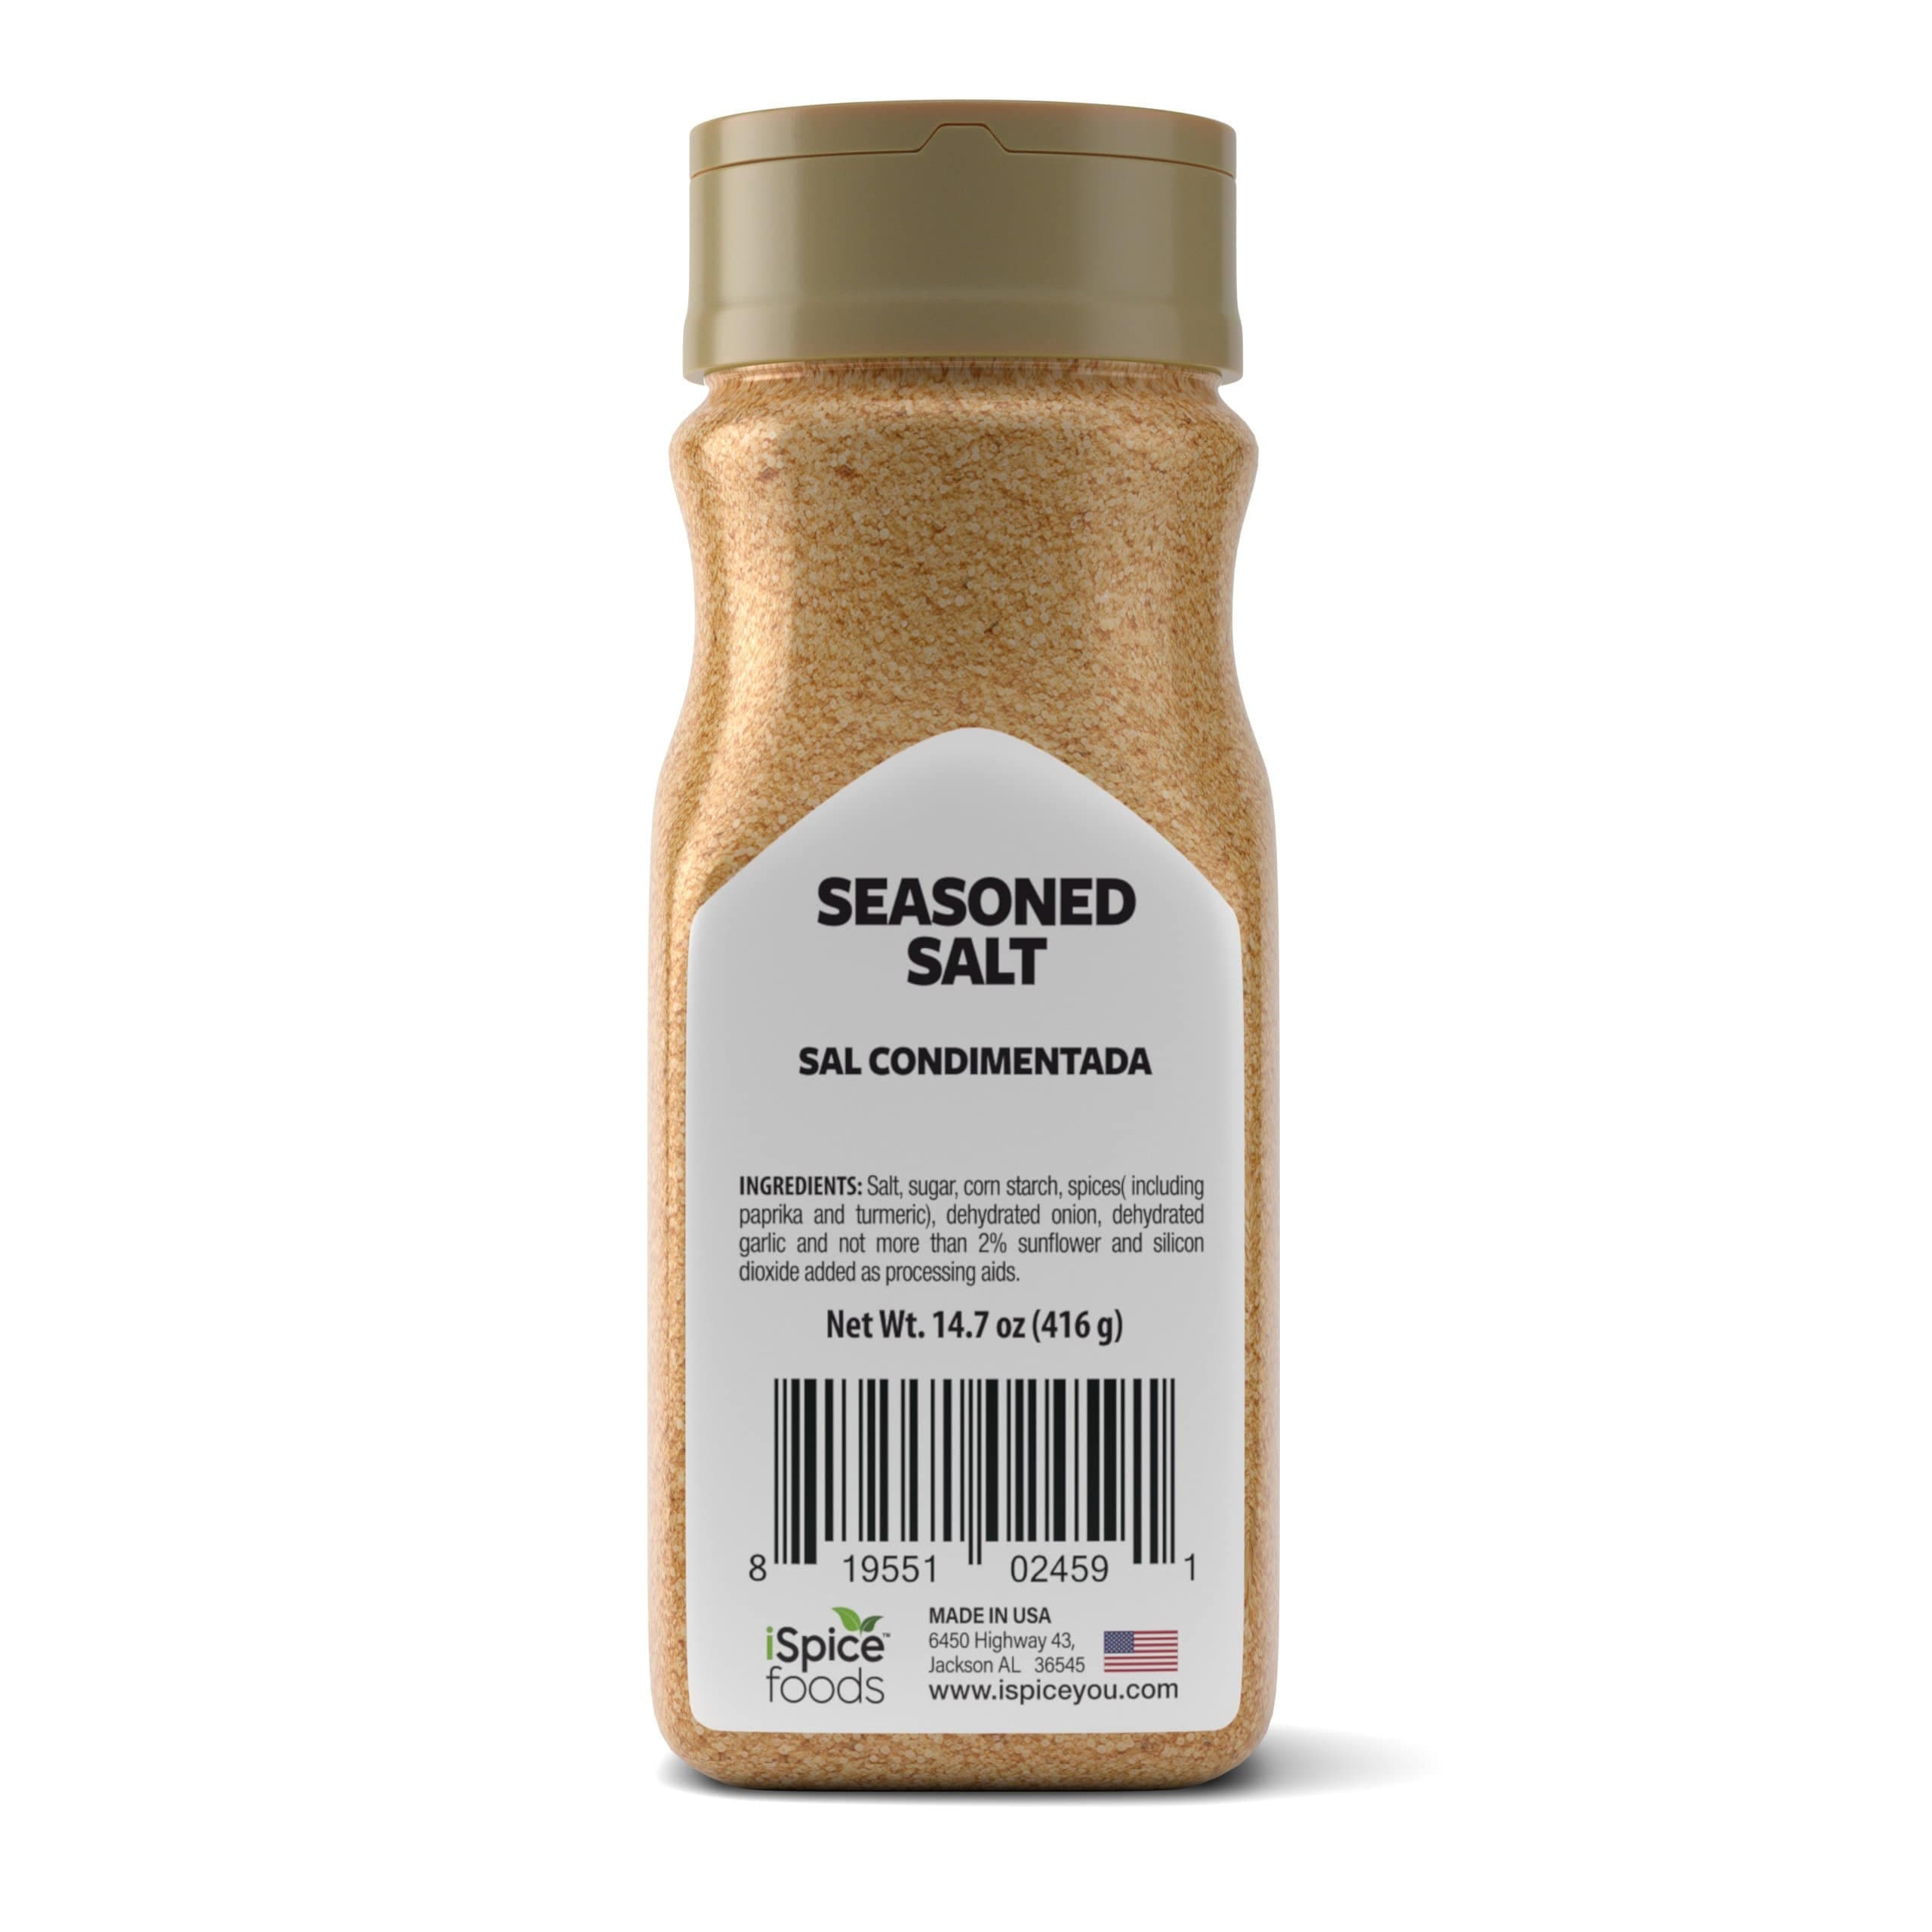 Spice Blends That Take the Place of Salt